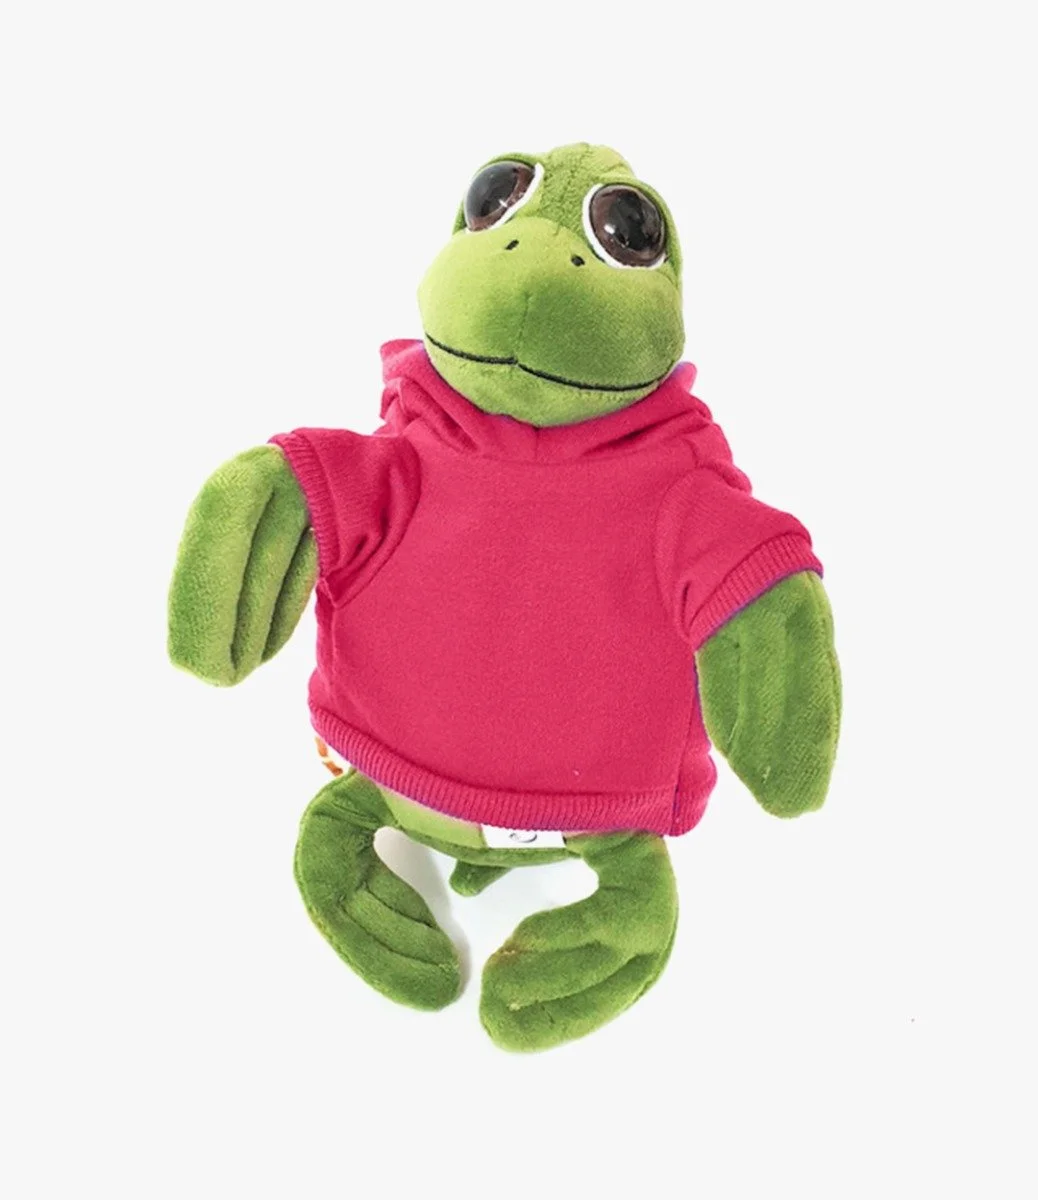 Green Turtle with Pink Hoodie 20cm by Fay Lawson